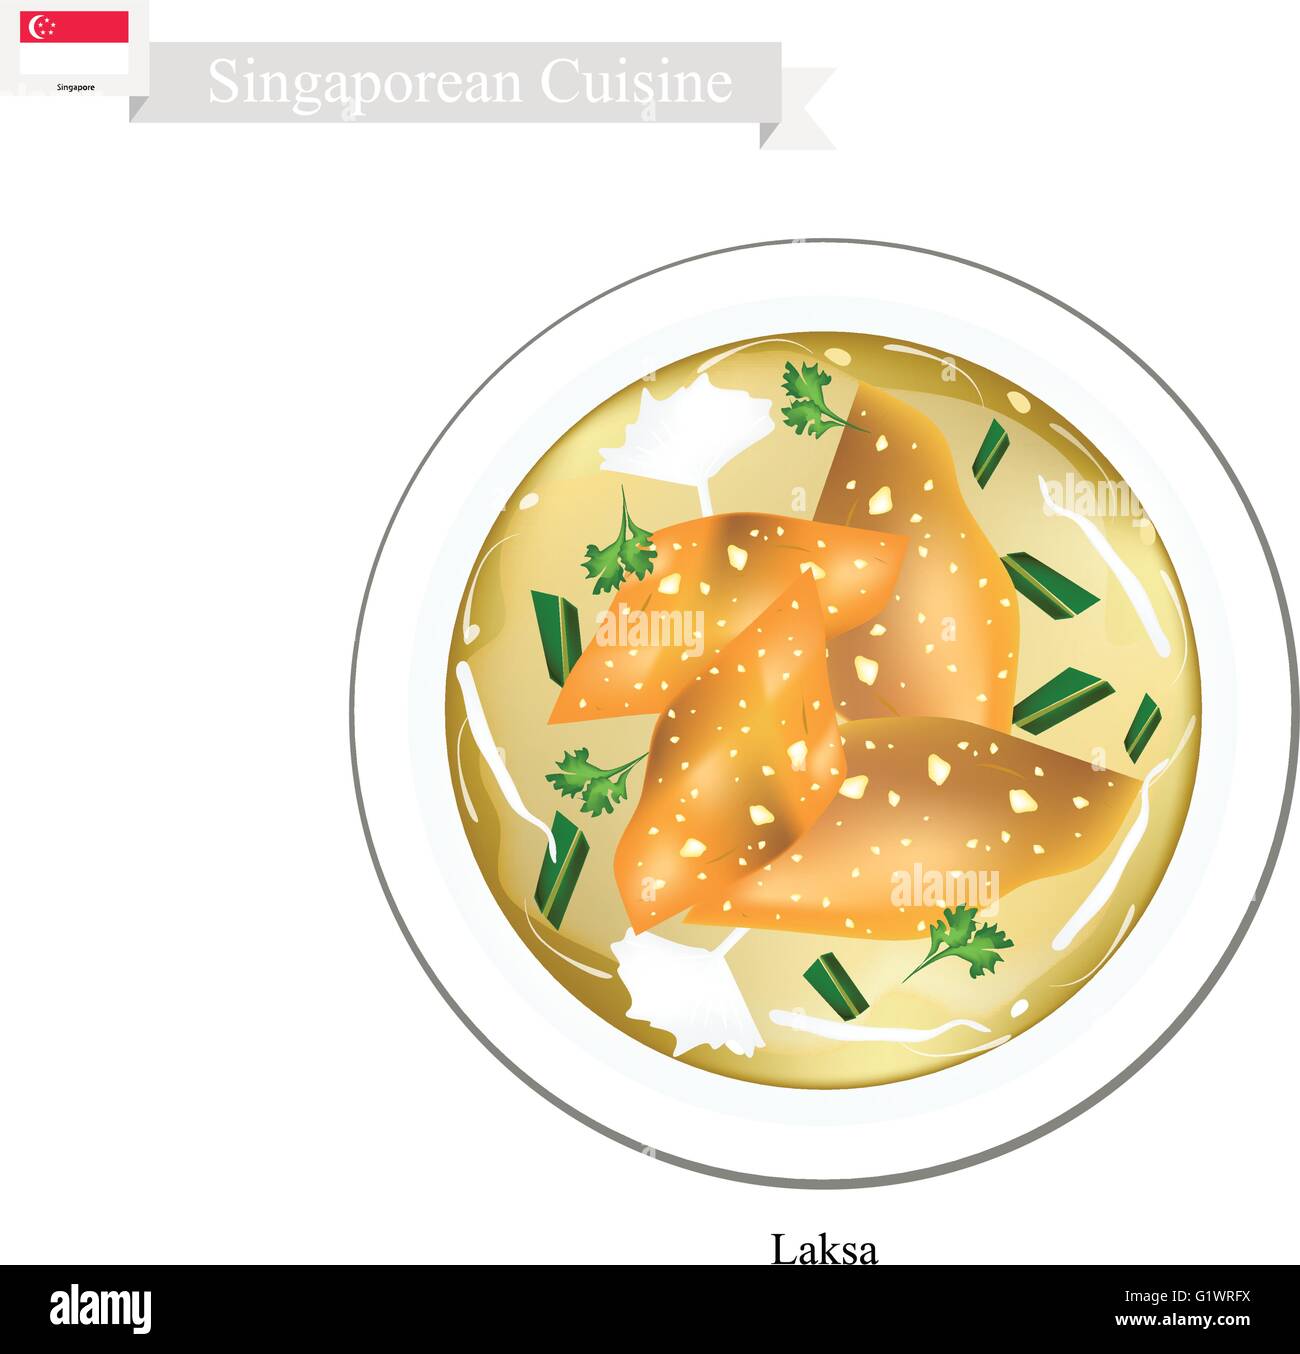 Singaporean Cuisine, Laksa or Traditional Rice Noodle and Dumpling Served in Spicy Soup. One of The Most Popular Dish in Singapo Stock Vector